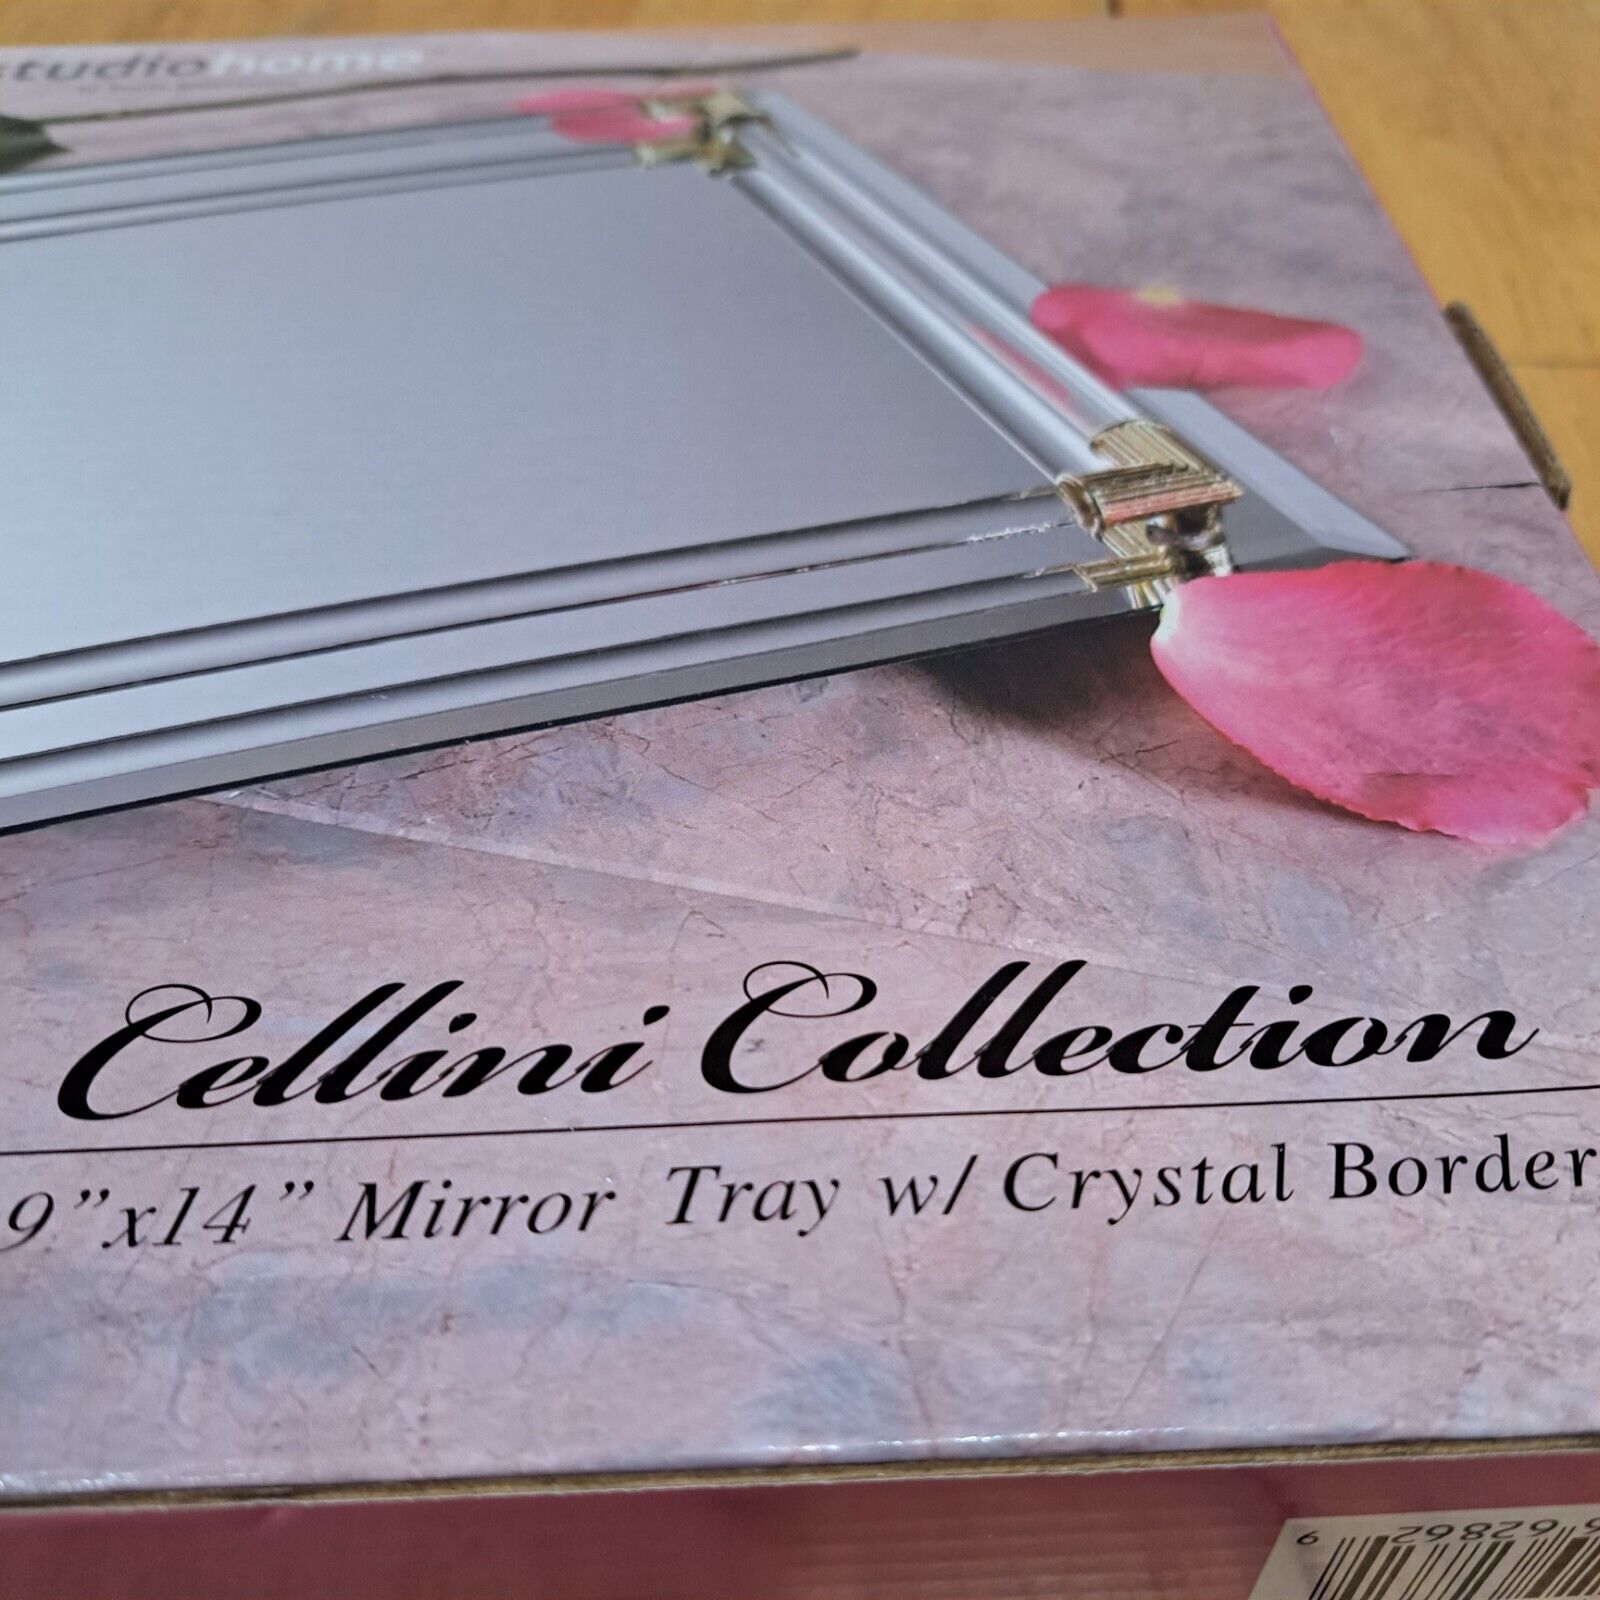 Mirror Tray with Crystal Border by Cellini Collection